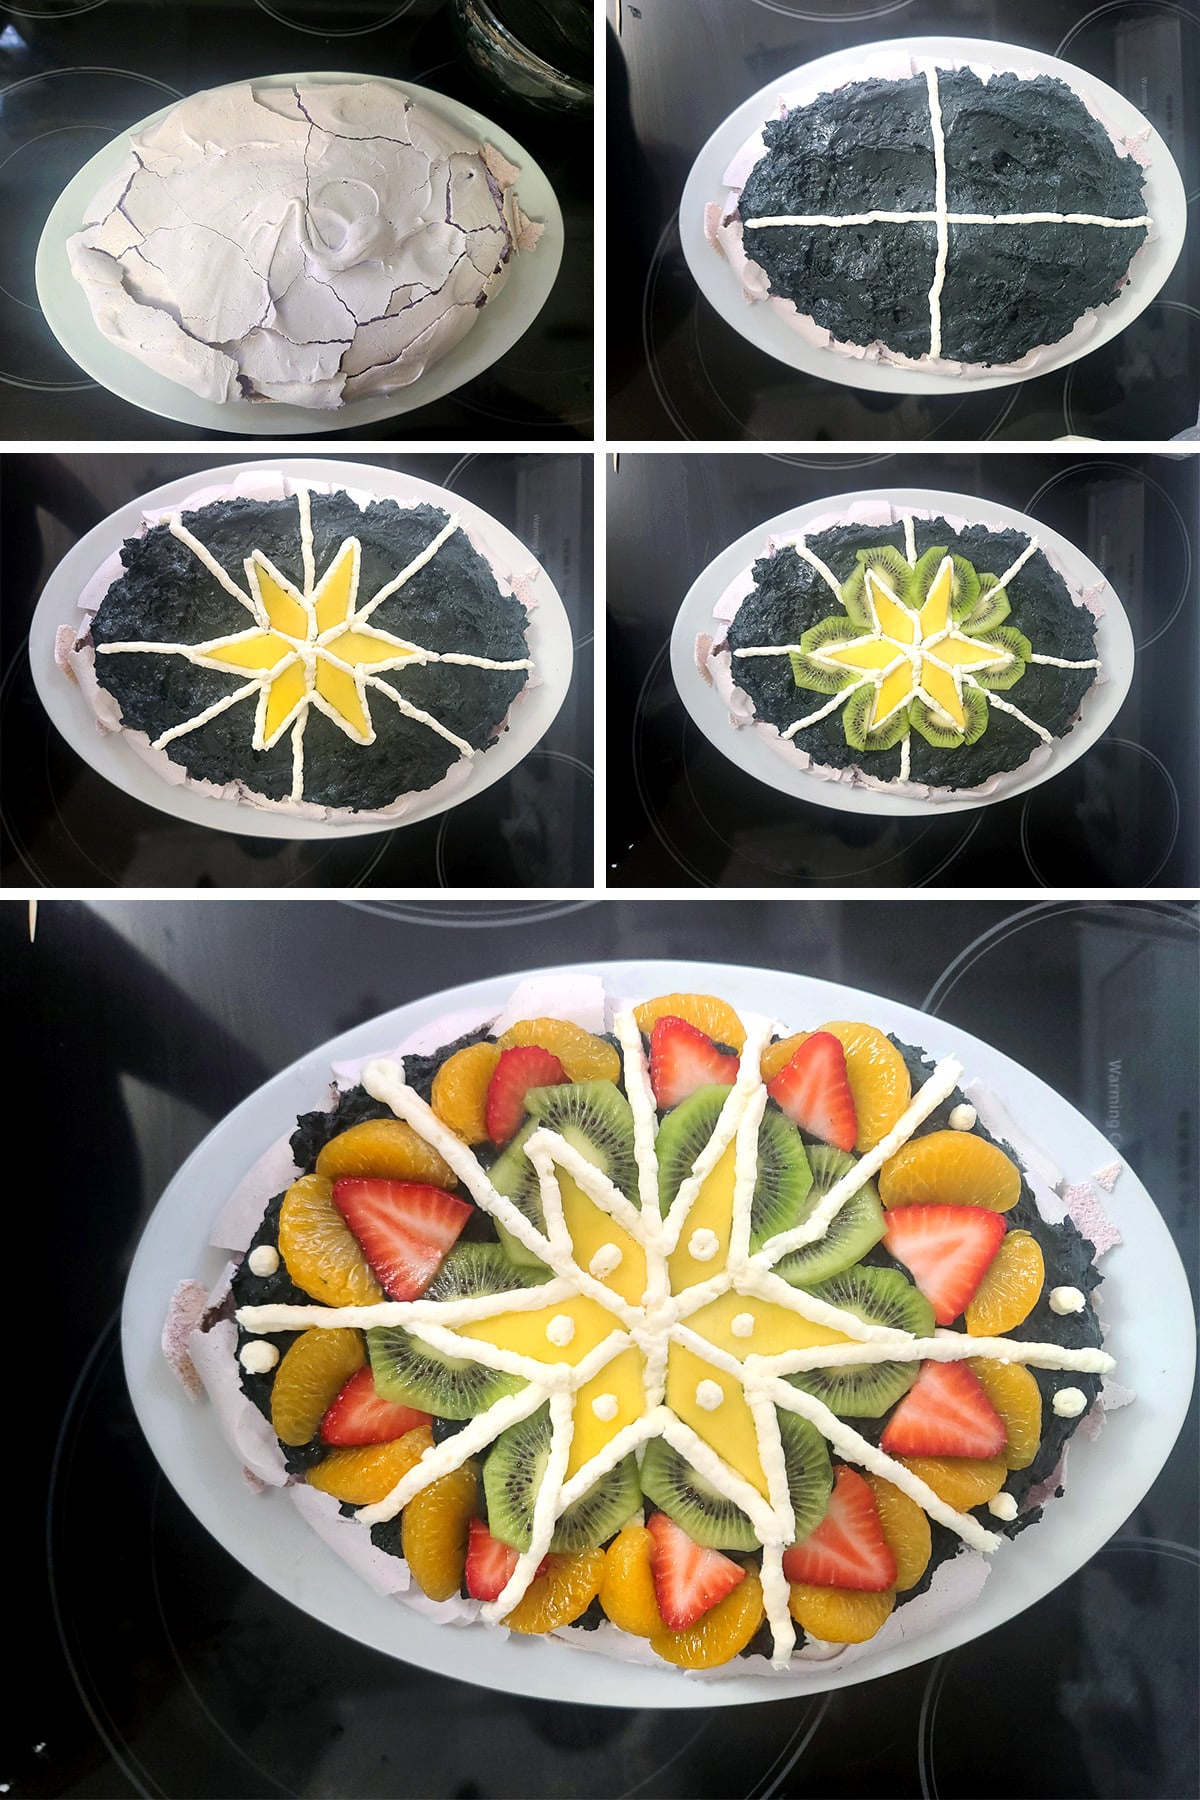 A 5 part image showing black whipped cream spread on the baked meringue, then topped with fruit and lines of white whipped cream to look like a Ukrainian Easter egg.